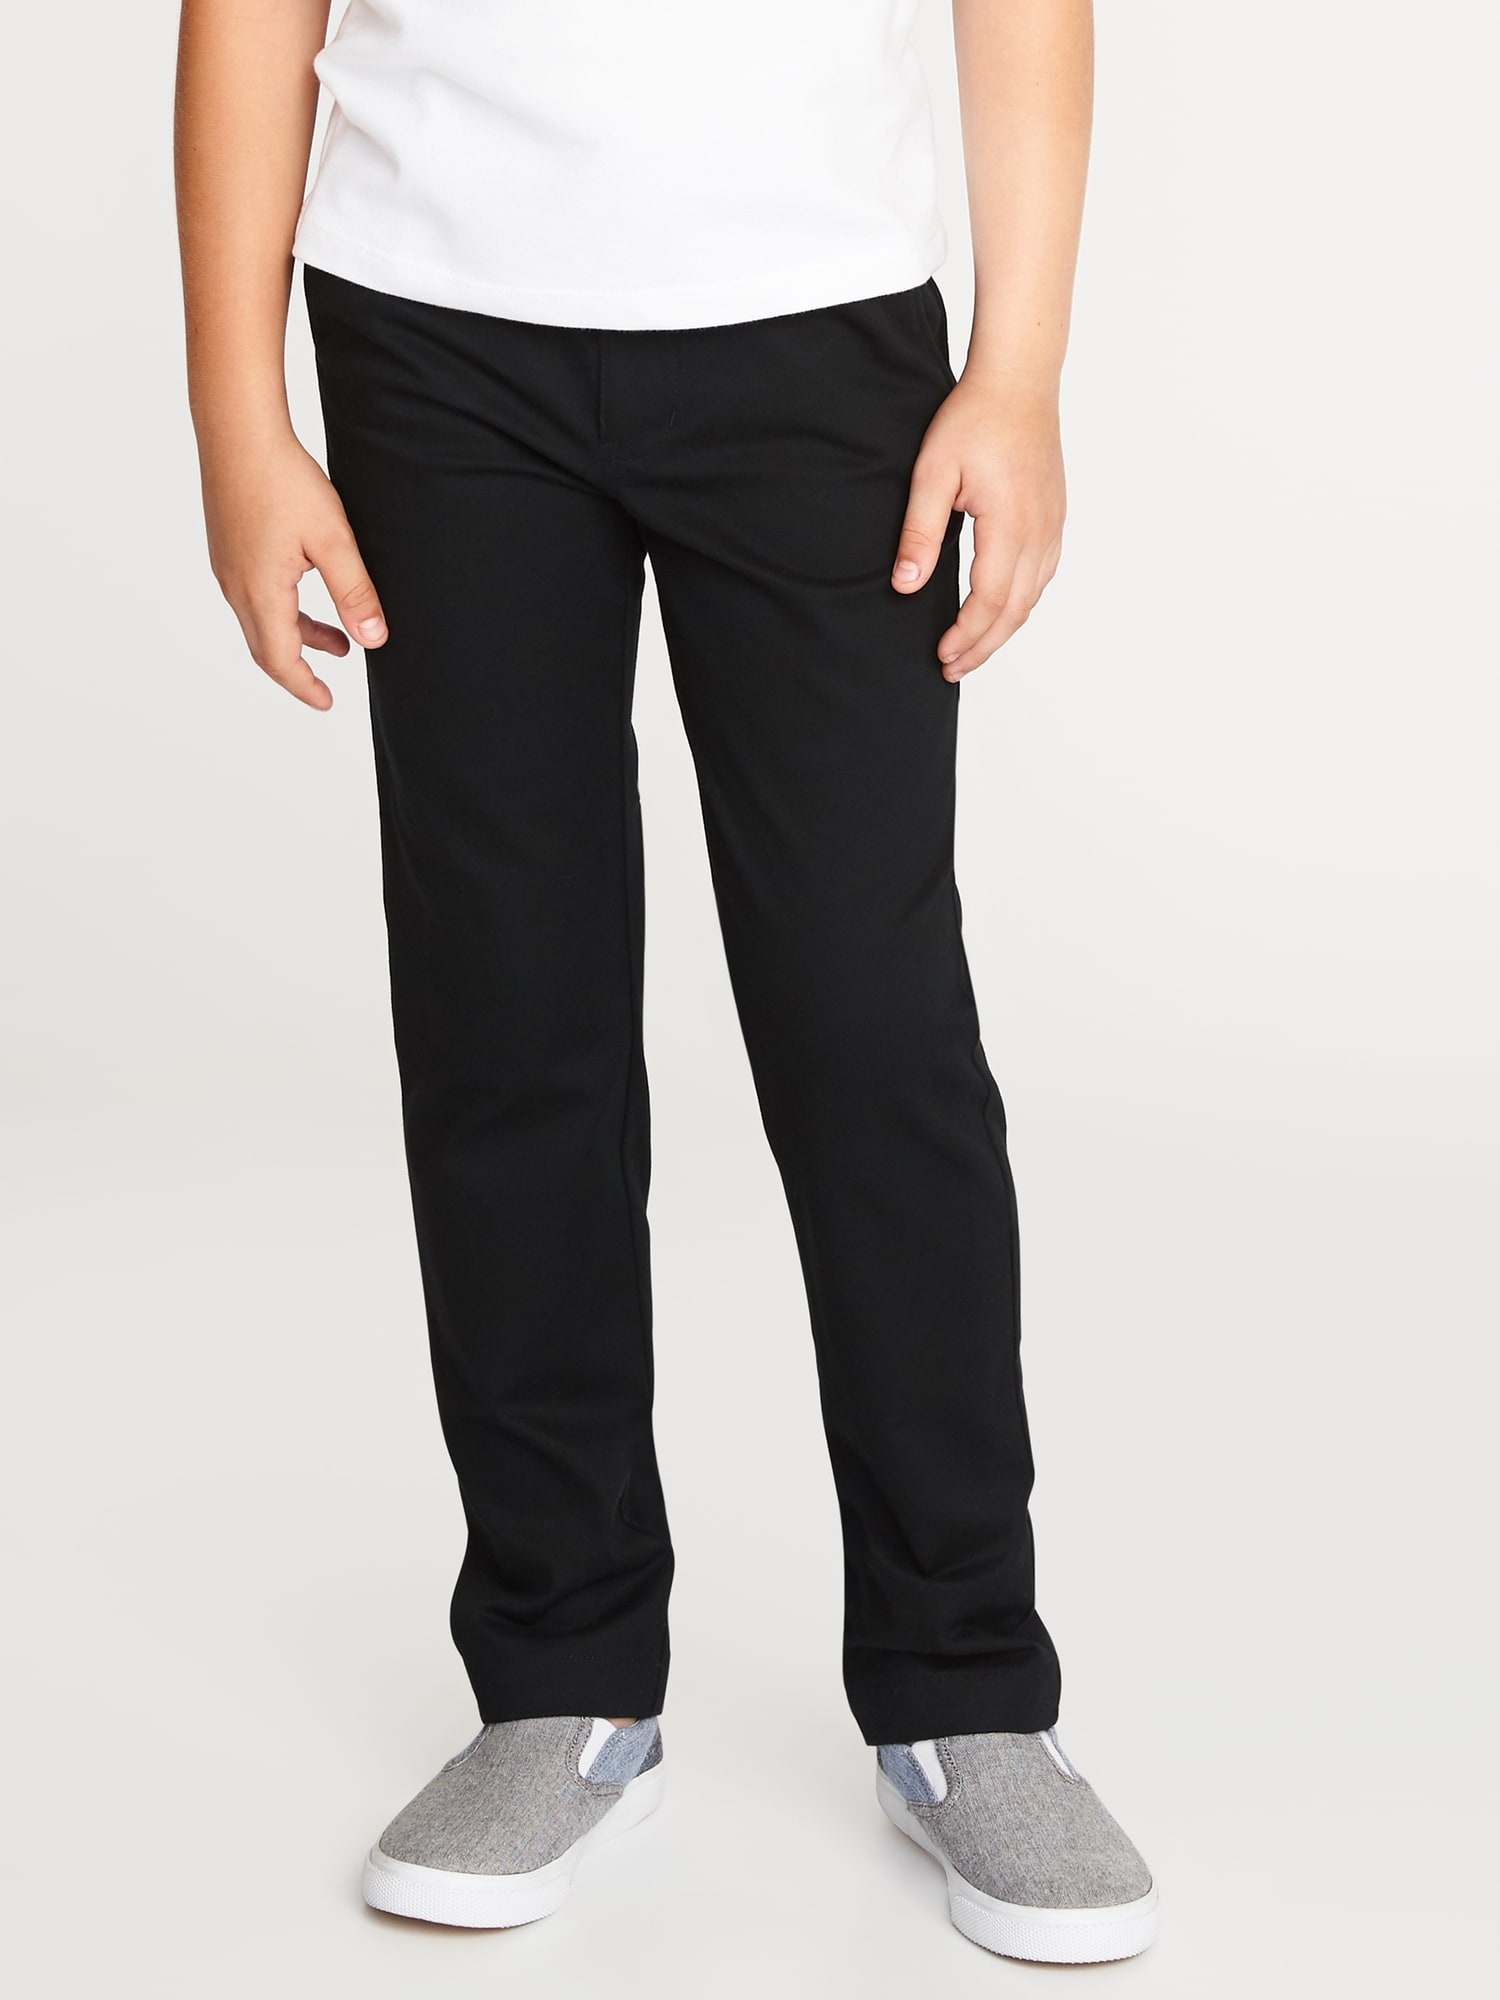 *Today Only Deal* Skinny Built-In Flex Uniform Pants for Boys